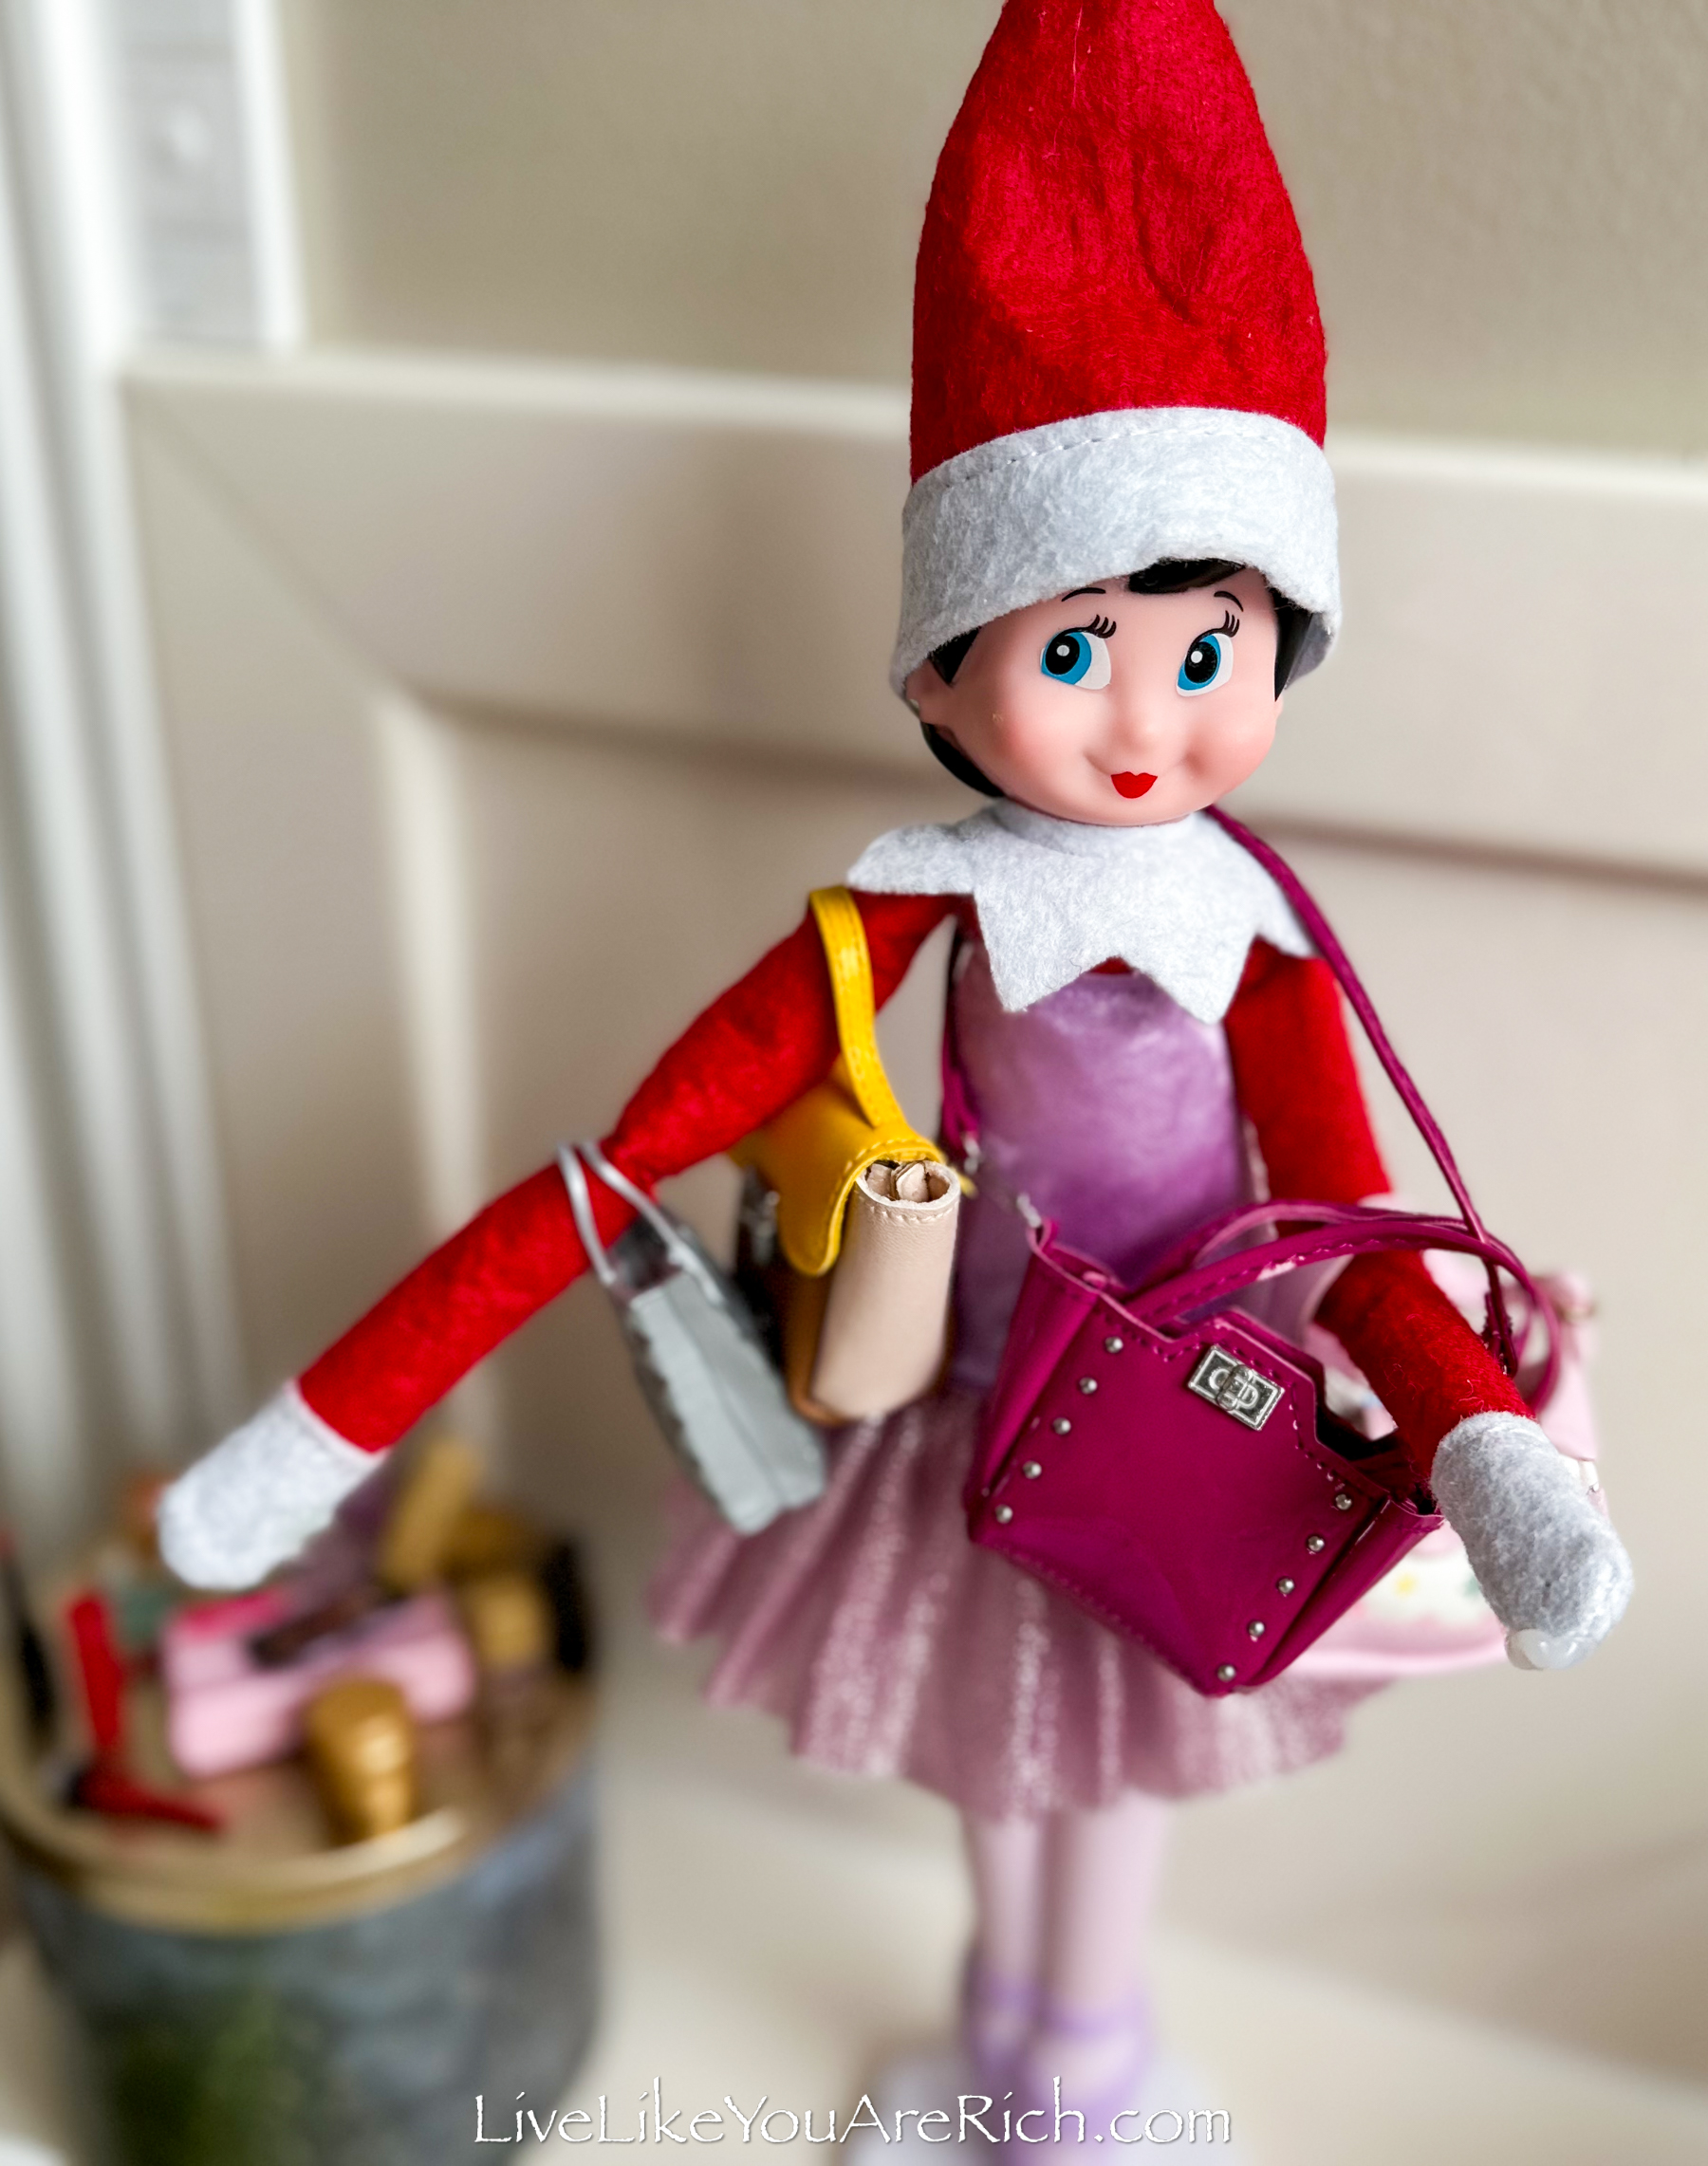 Elf on the Shelf: Girls' Night Out